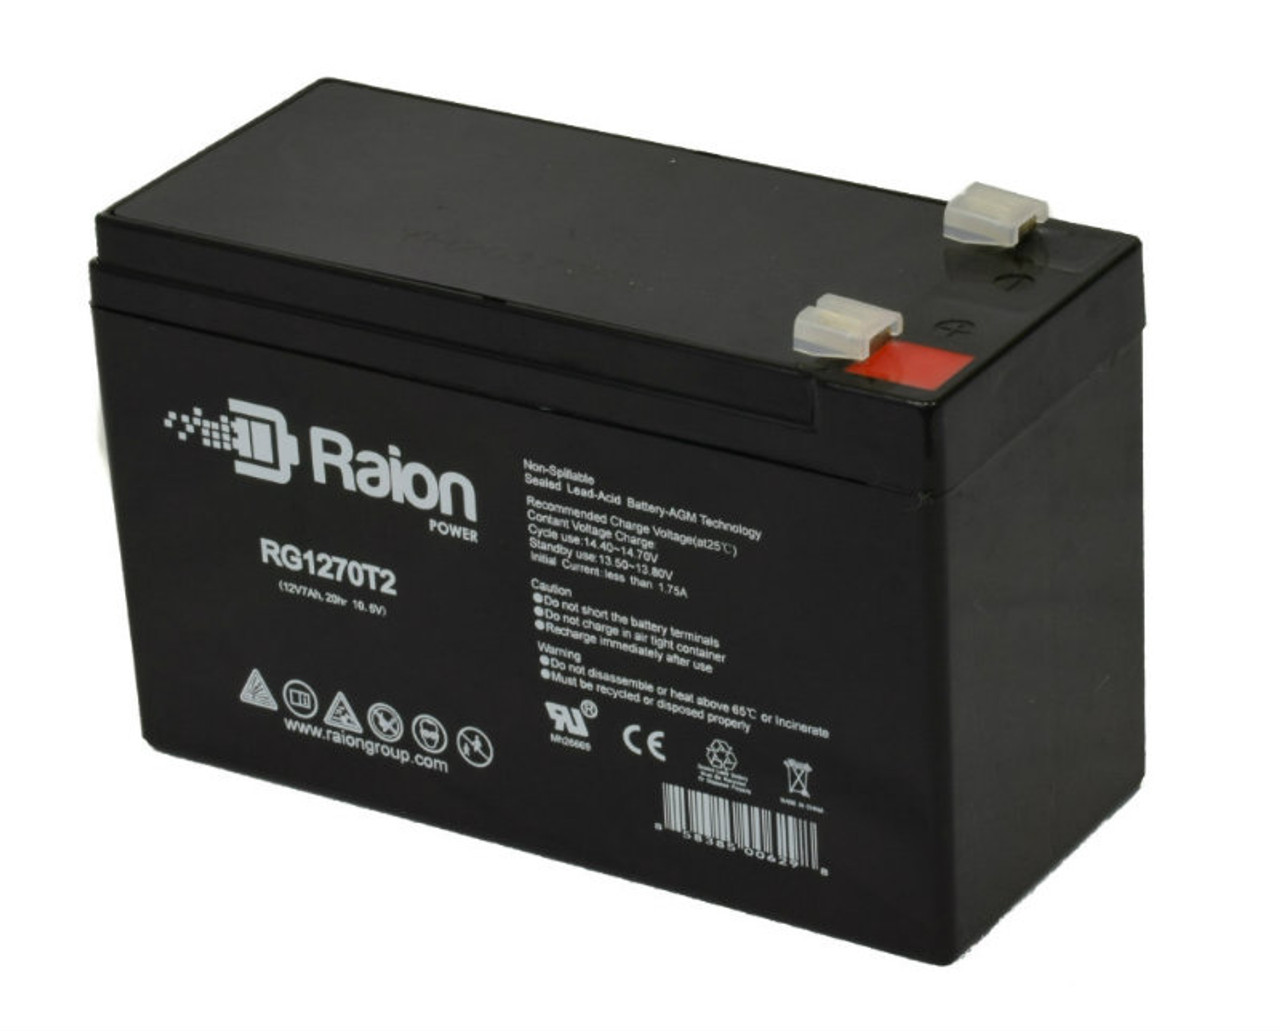 Raion Power Replacement 12V 7Ah Battery for Humminbird 141c Fish Finder - 1 Pack